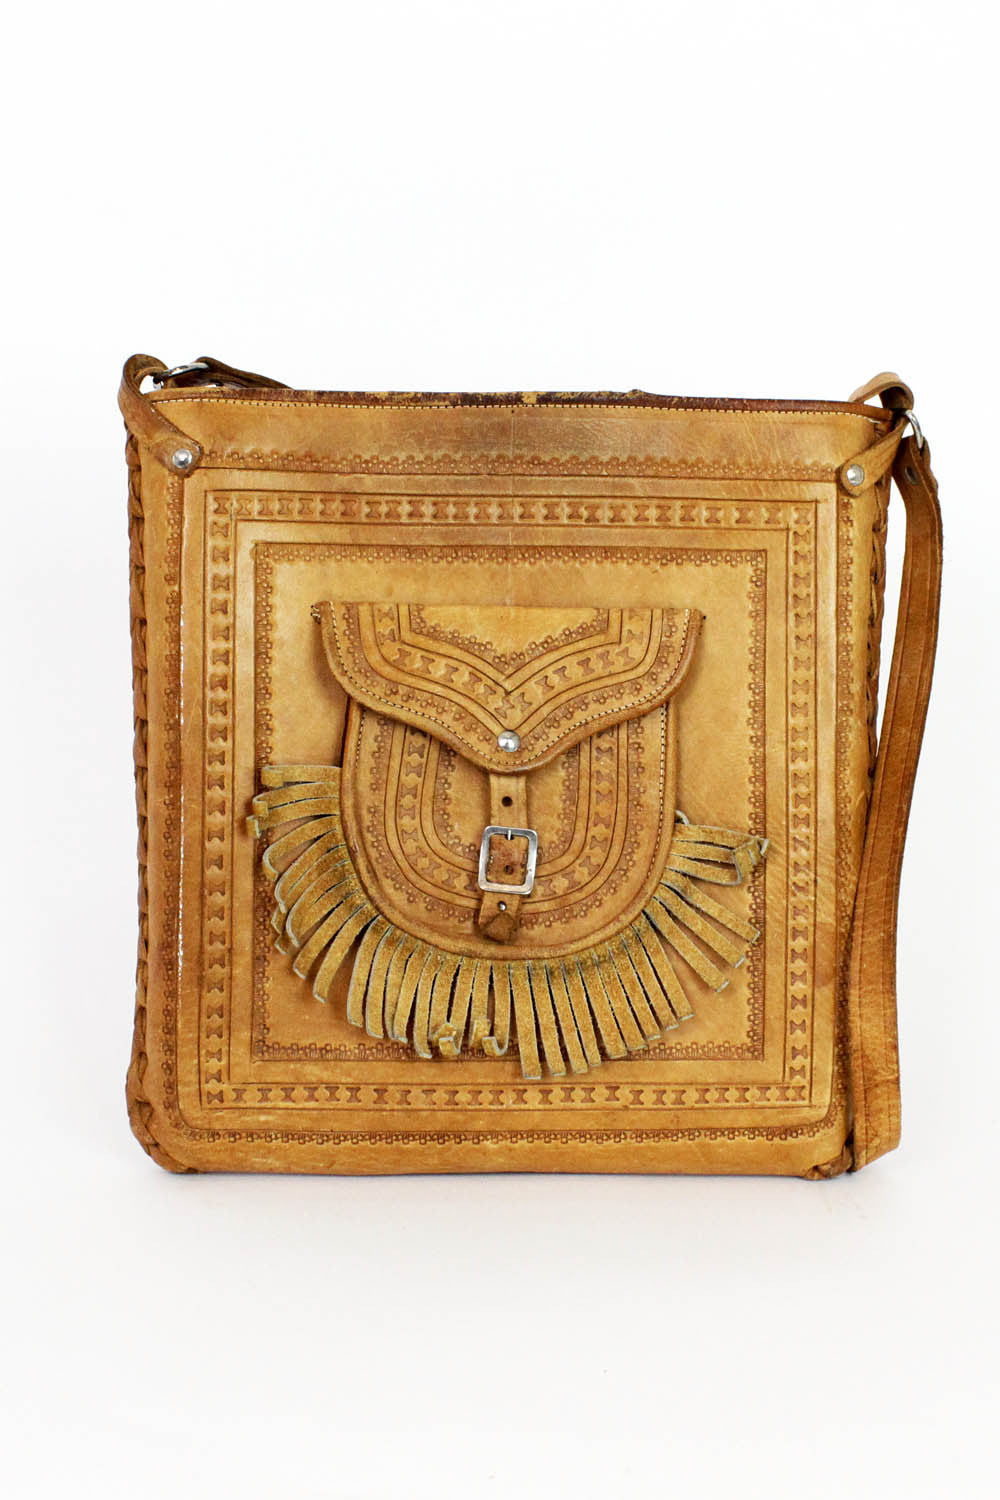 70s tooled leather purse